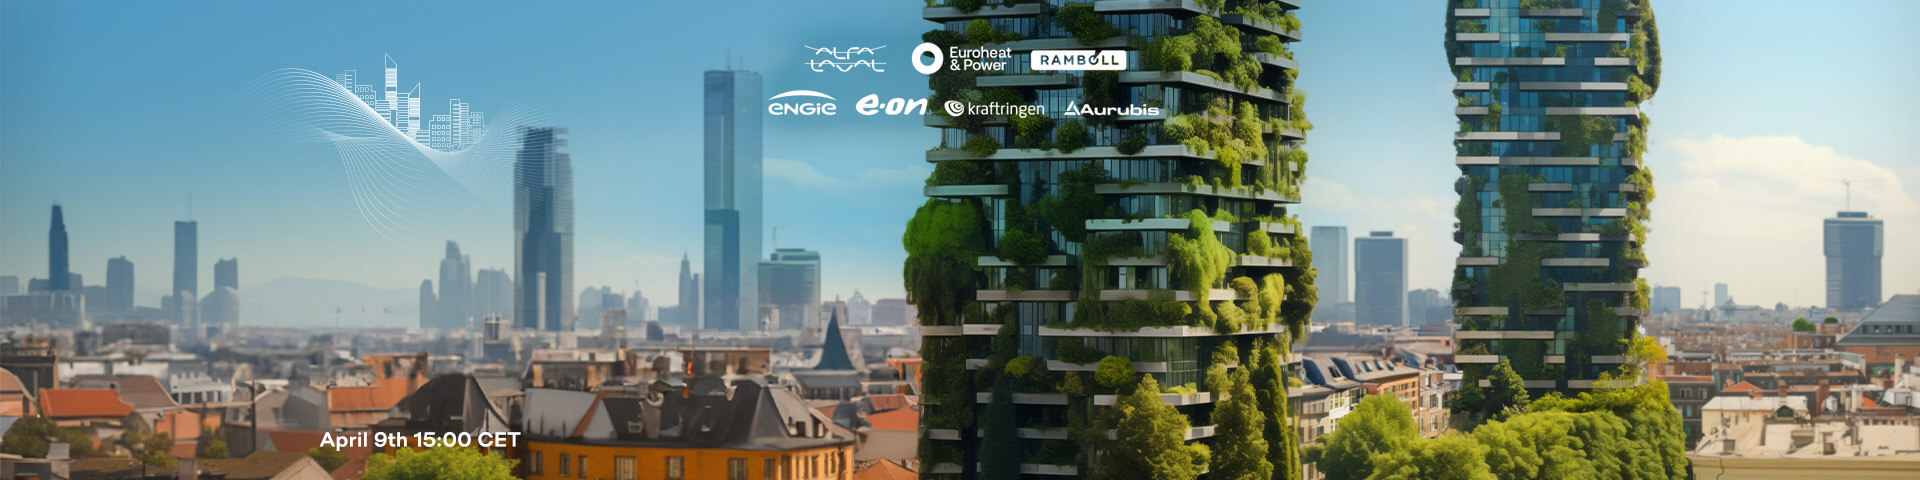 sustainable cities event banner